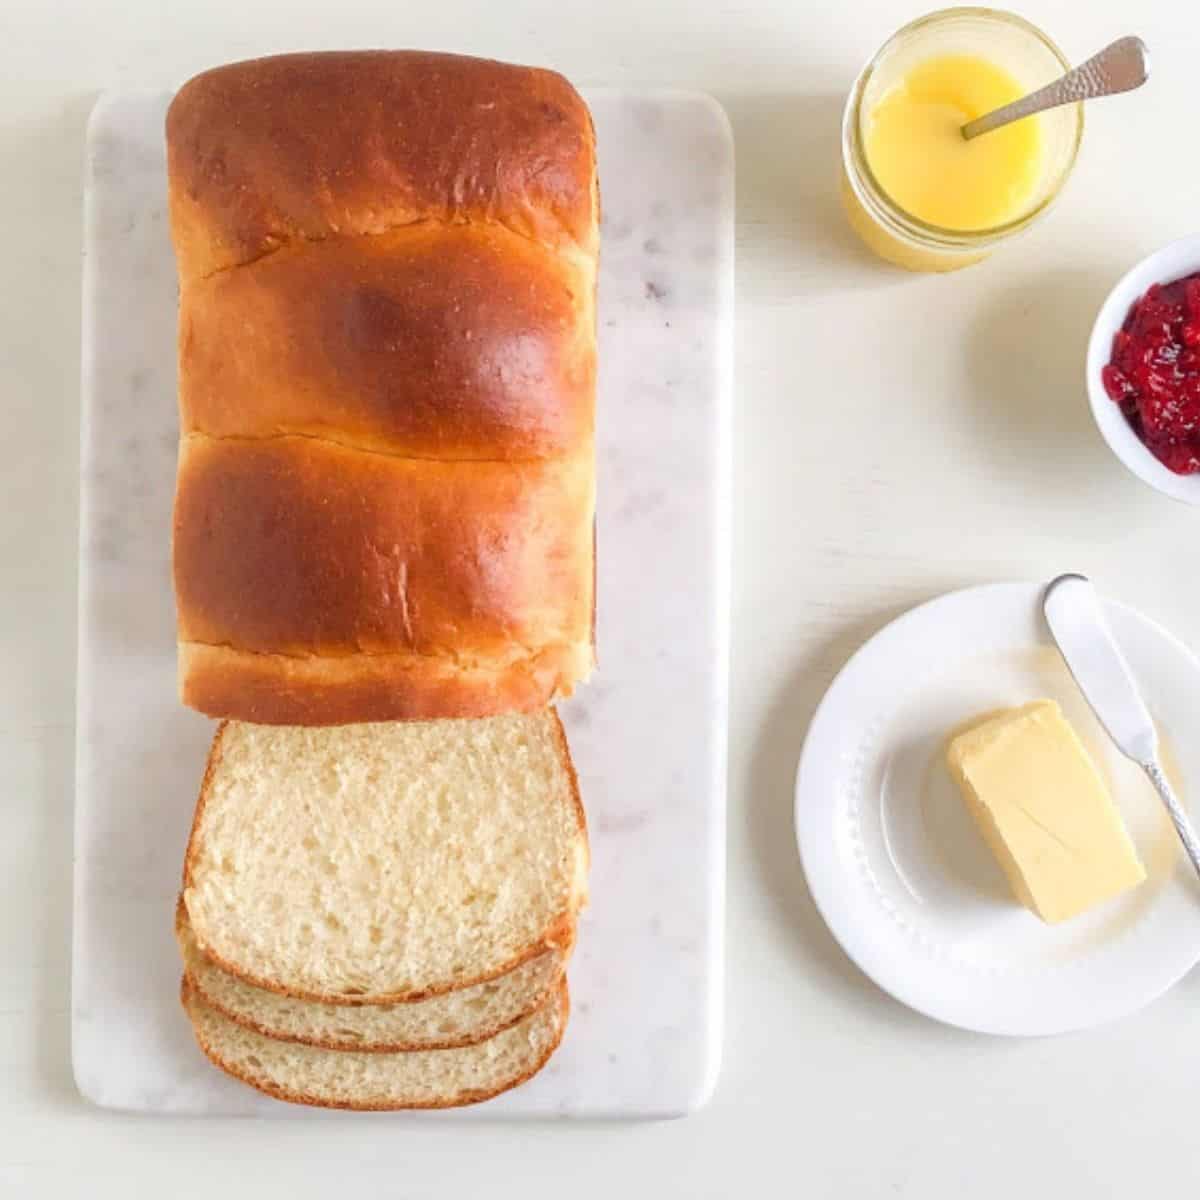 Baked bread partially sliced on marble cutting board, next to small round white plate with butter and silver butter knife. small round bowl with strawberry freezer jam, and mason jar with lemon curd and small silver spoon.